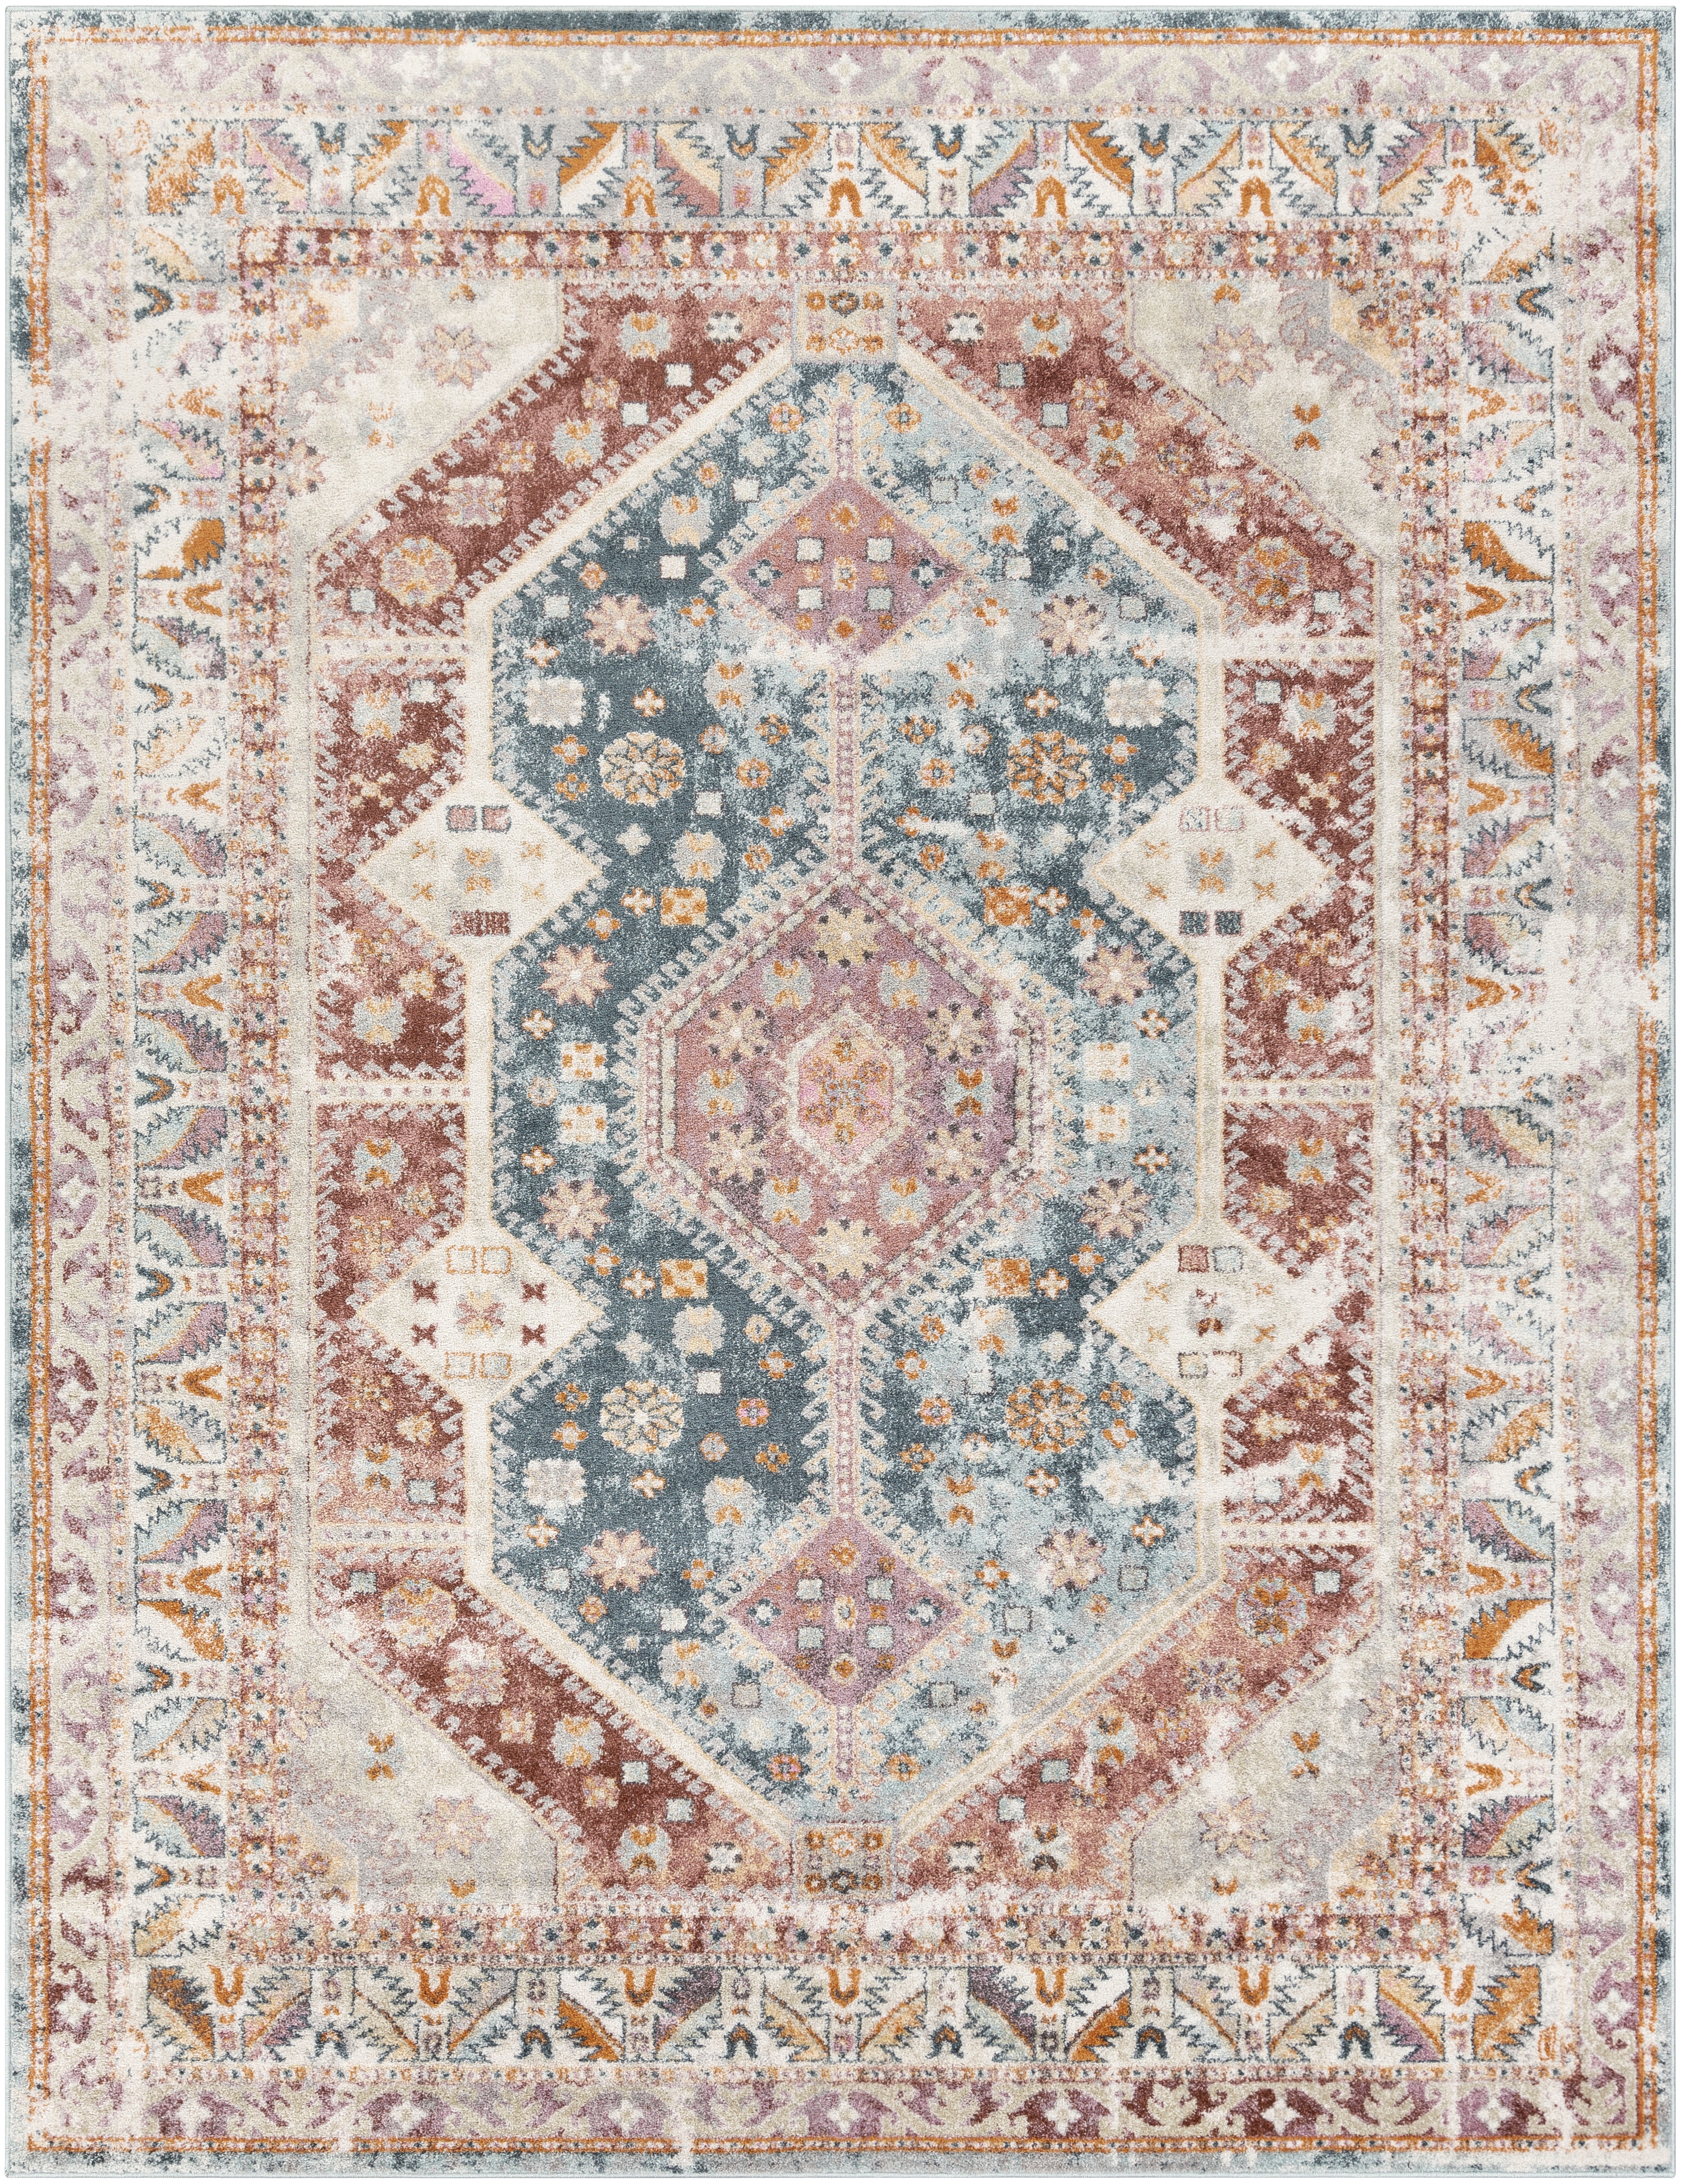 New Mexico Rug, 7'10" x 10'2" - Image 0